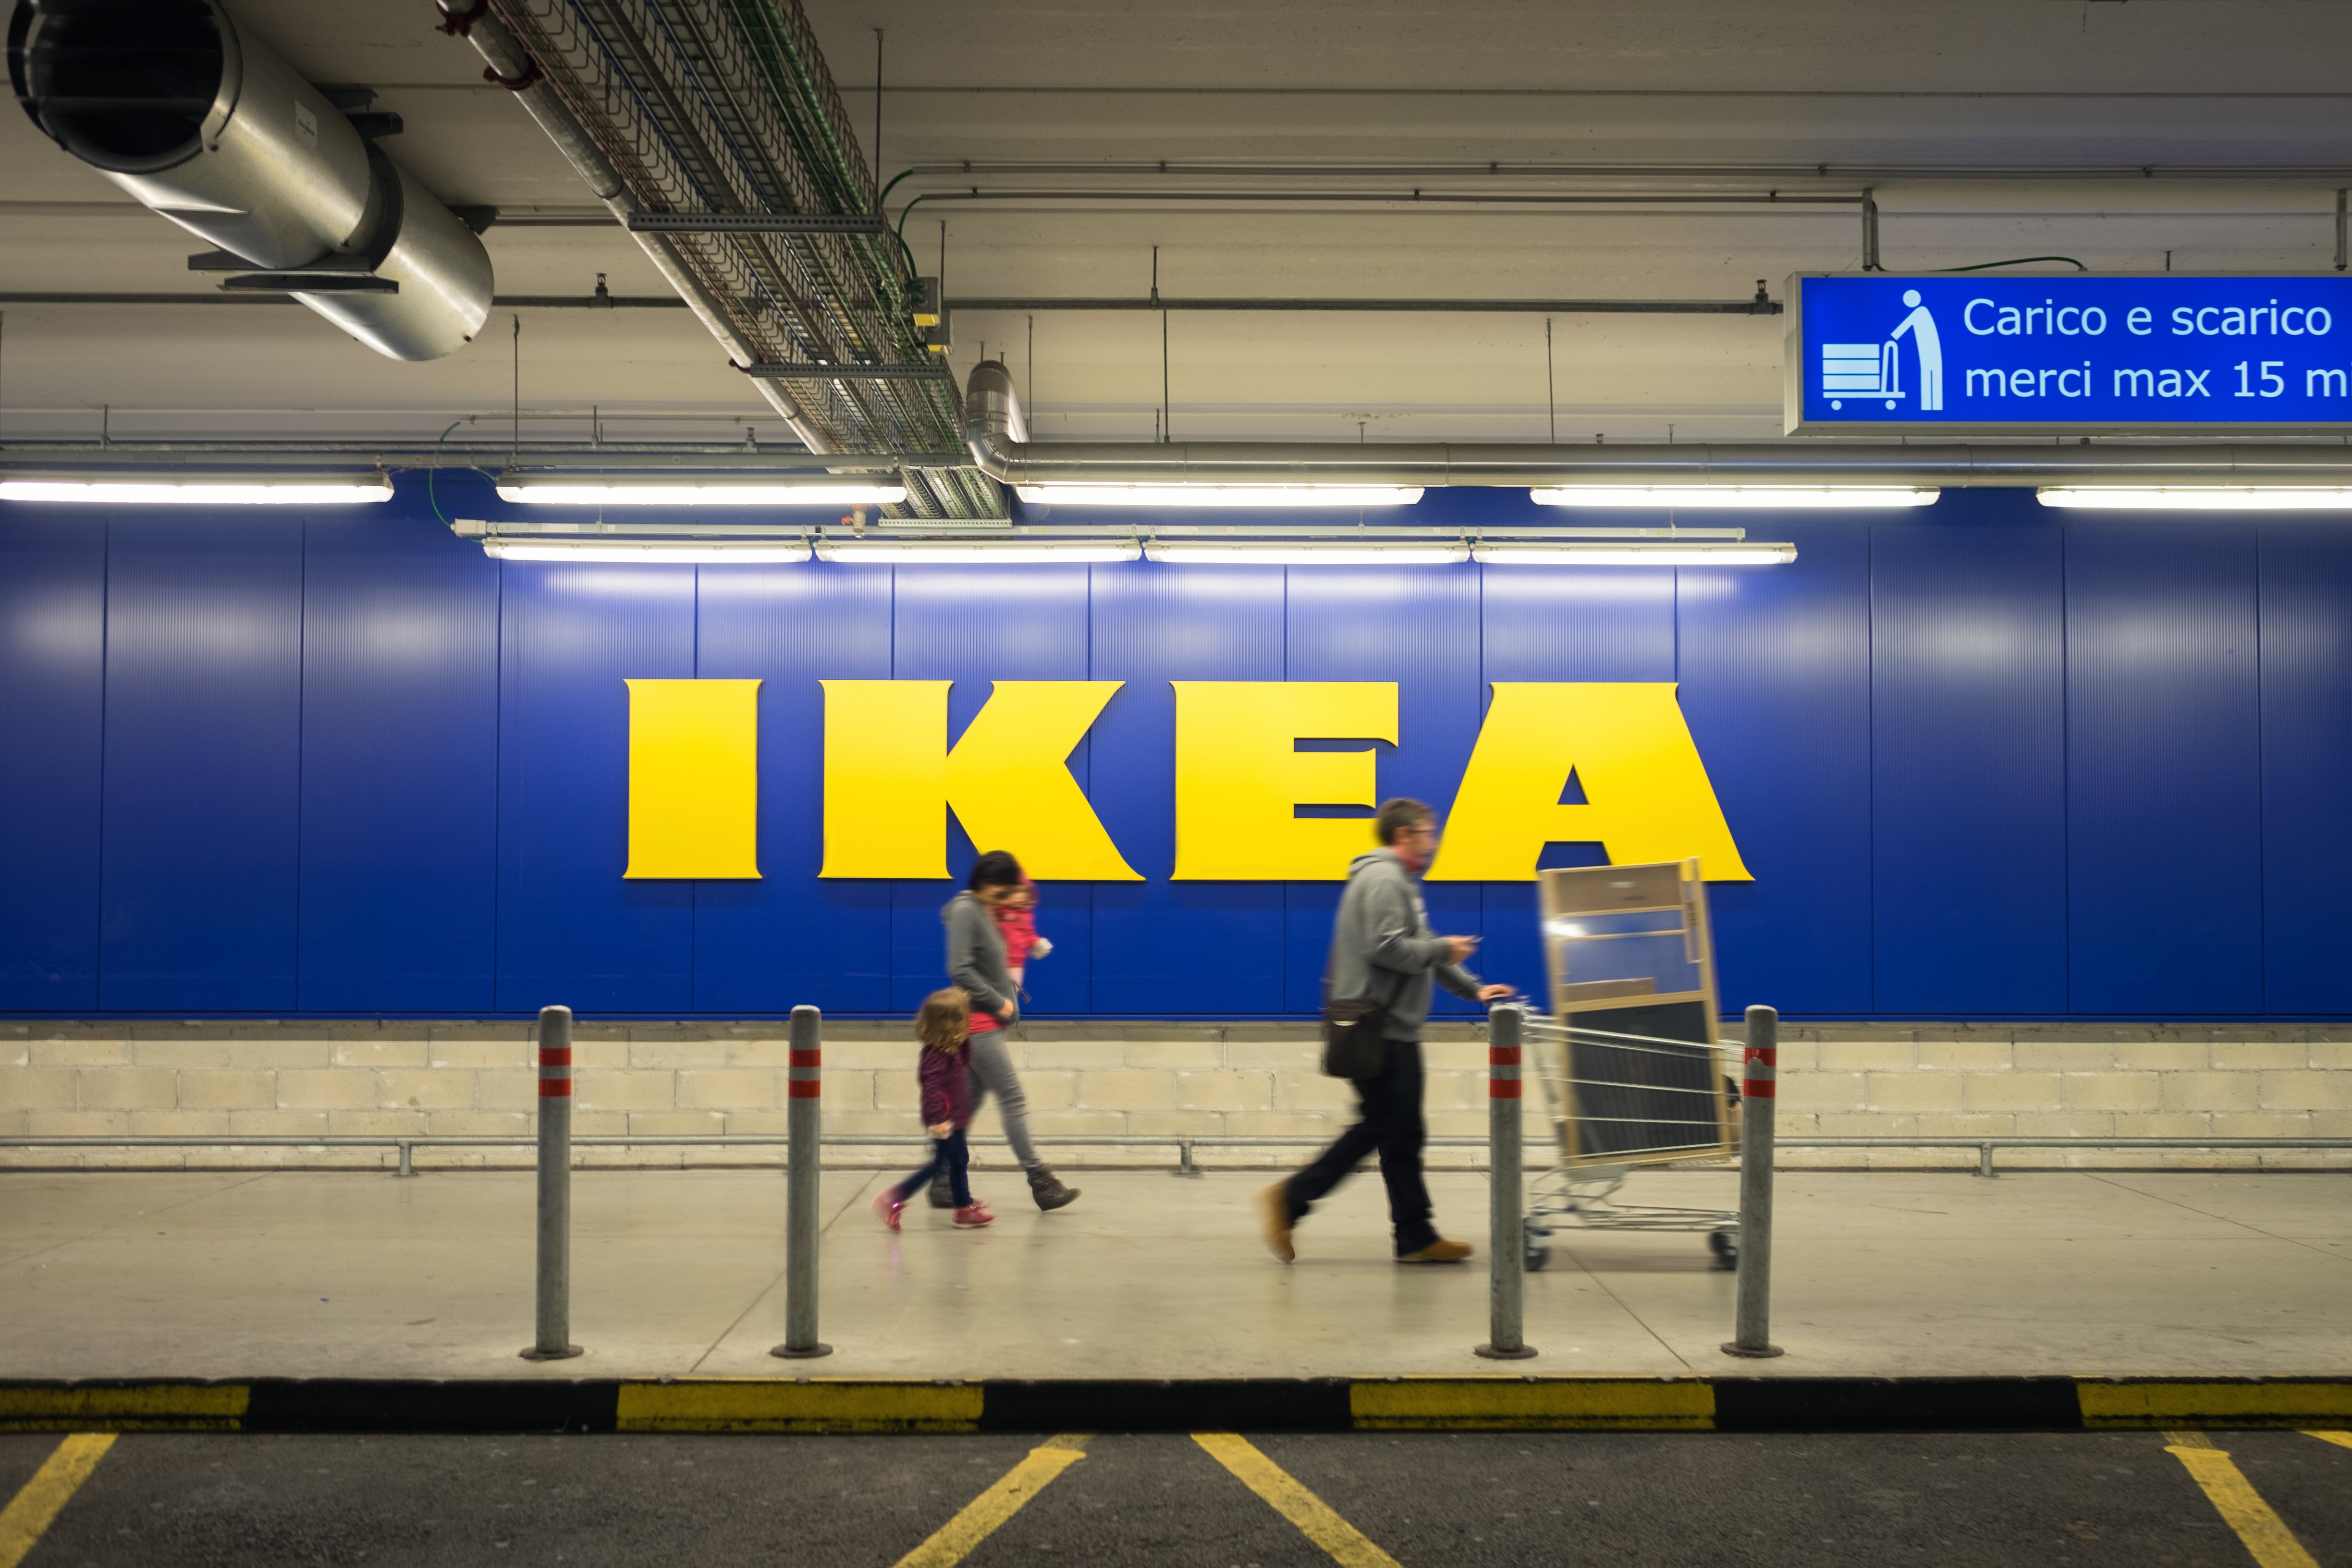 <p>‘The devastating war in Ukraine is a human tragedy and our deepest empathy and concerns are with the millions of people impacted’, Ikea said in a statement</p>